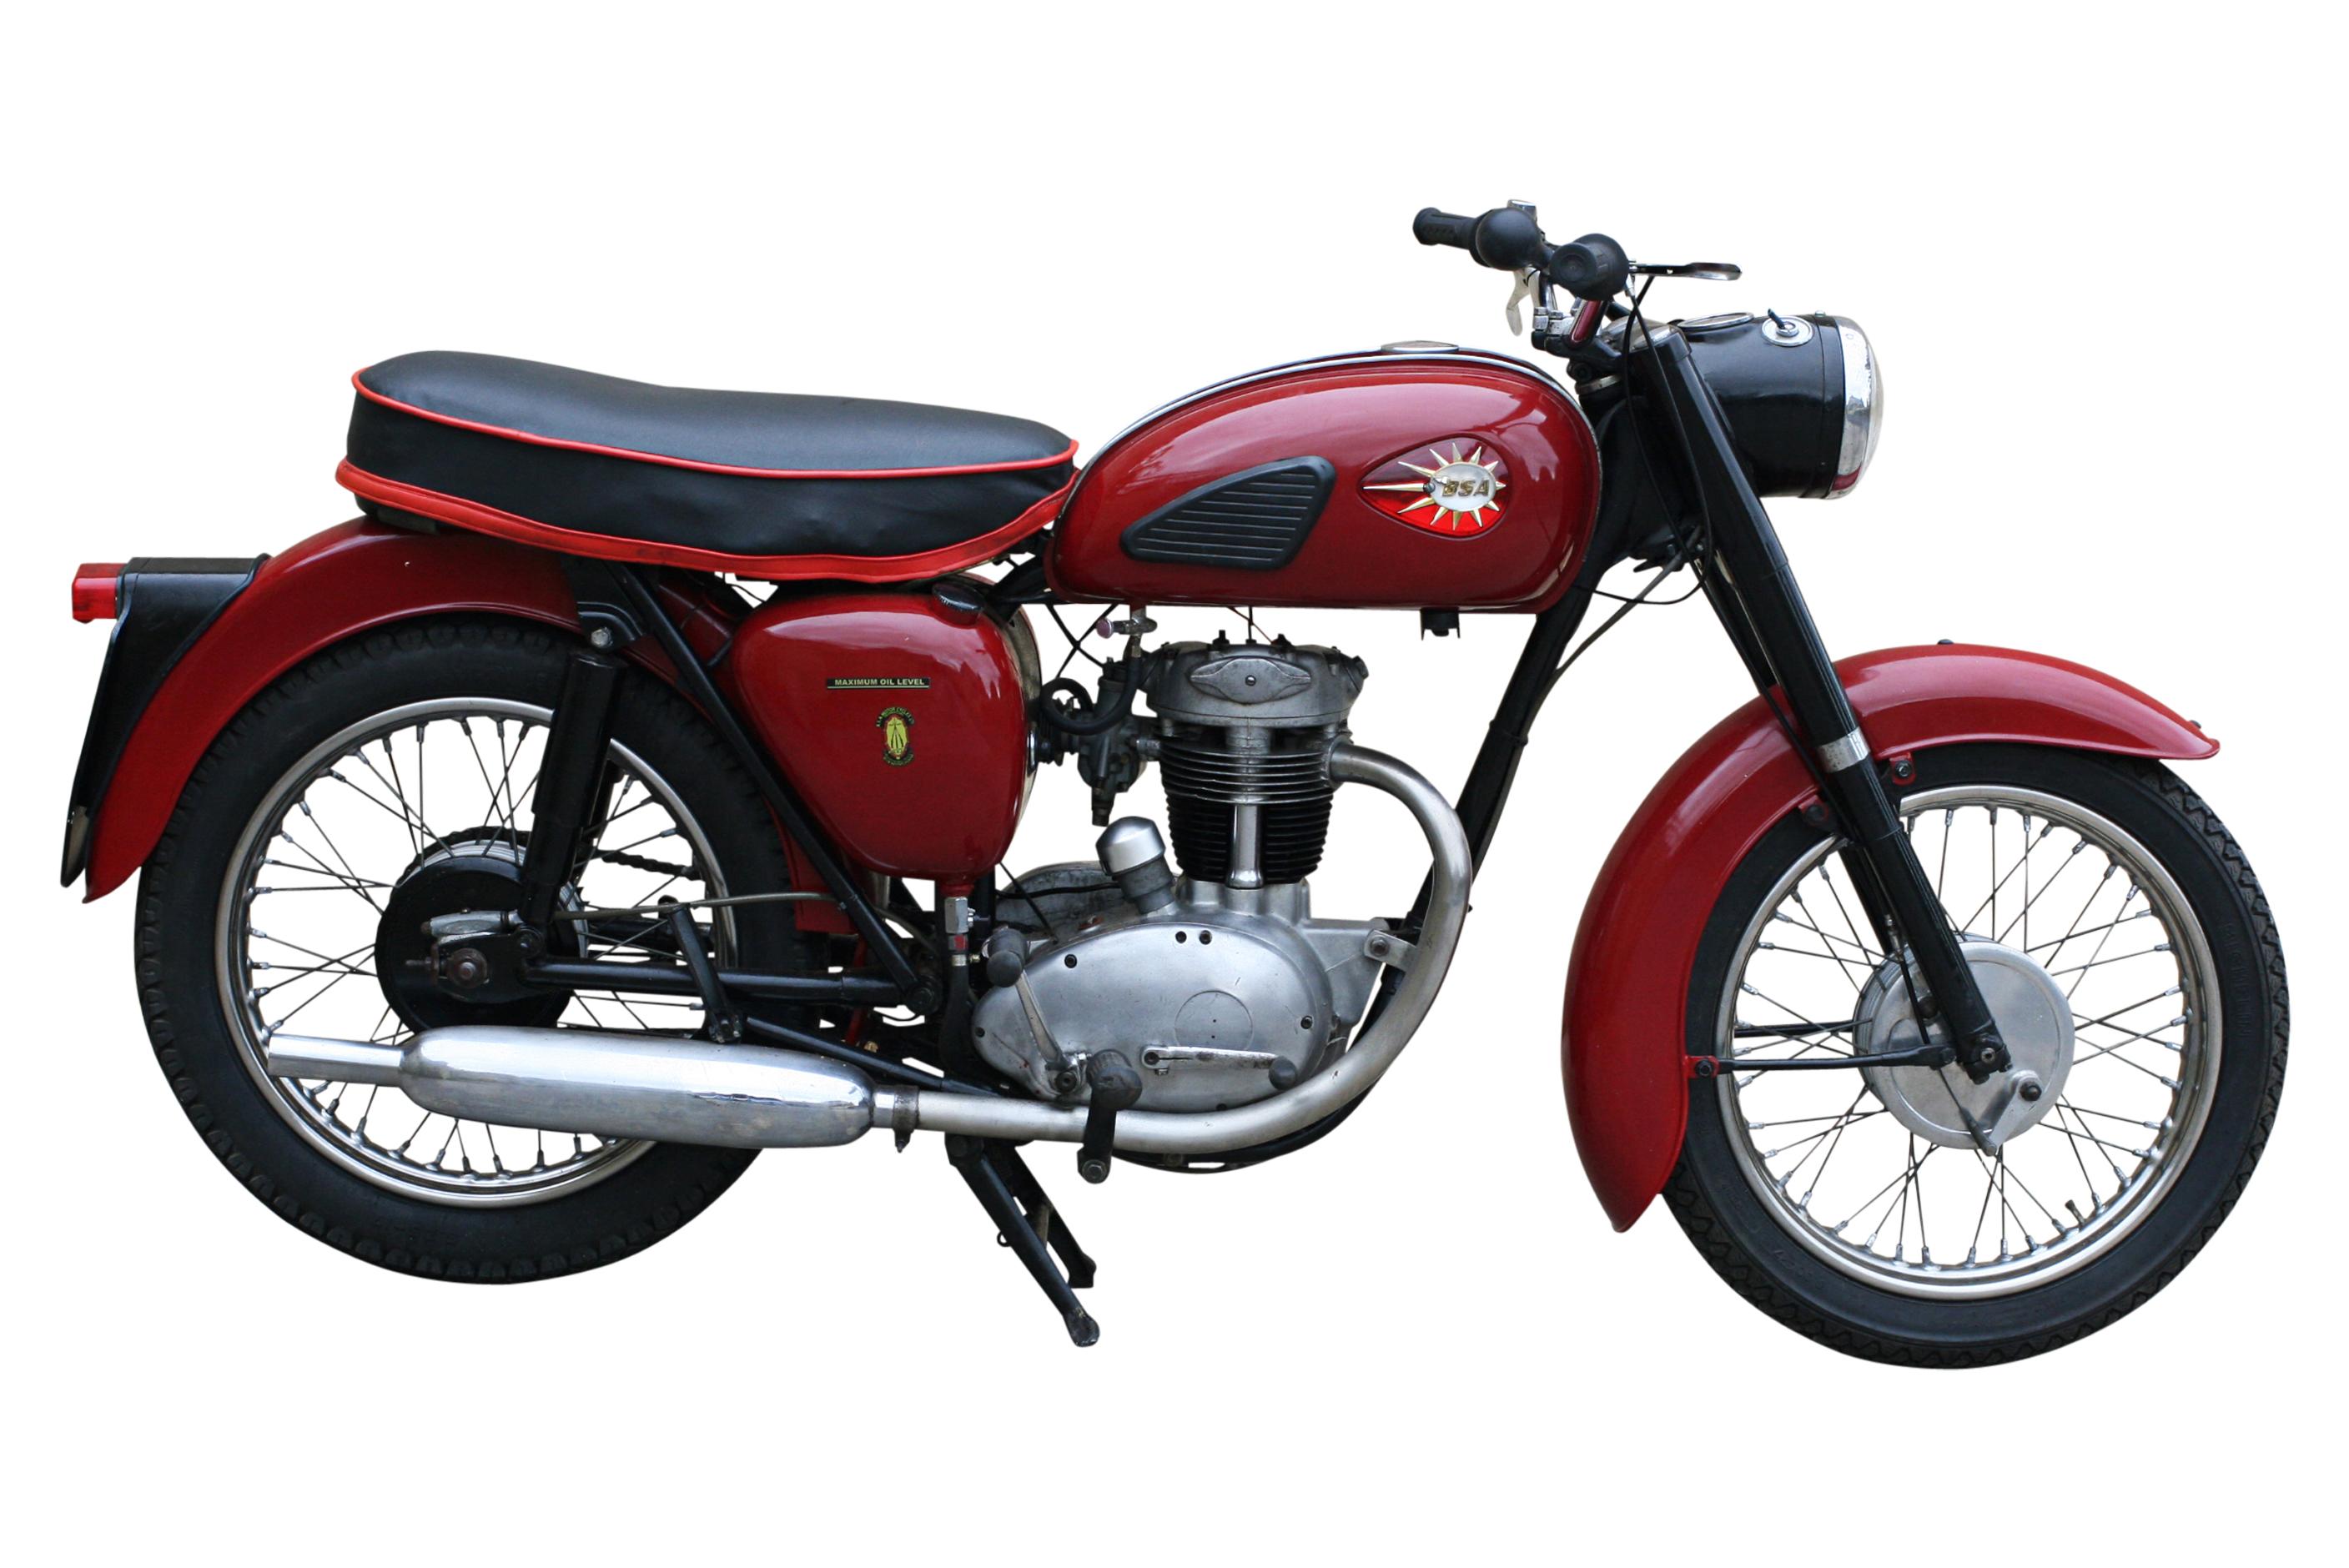 A 1962 BSA C15, 250cc single-cylinder ohv motorcycle manufactured by the British company BSA. They were manufactured from 1958 until 1967, and was BSA's first four-stroke unit-construction bike. Tax and MOT exempt, in good condition, deep red in